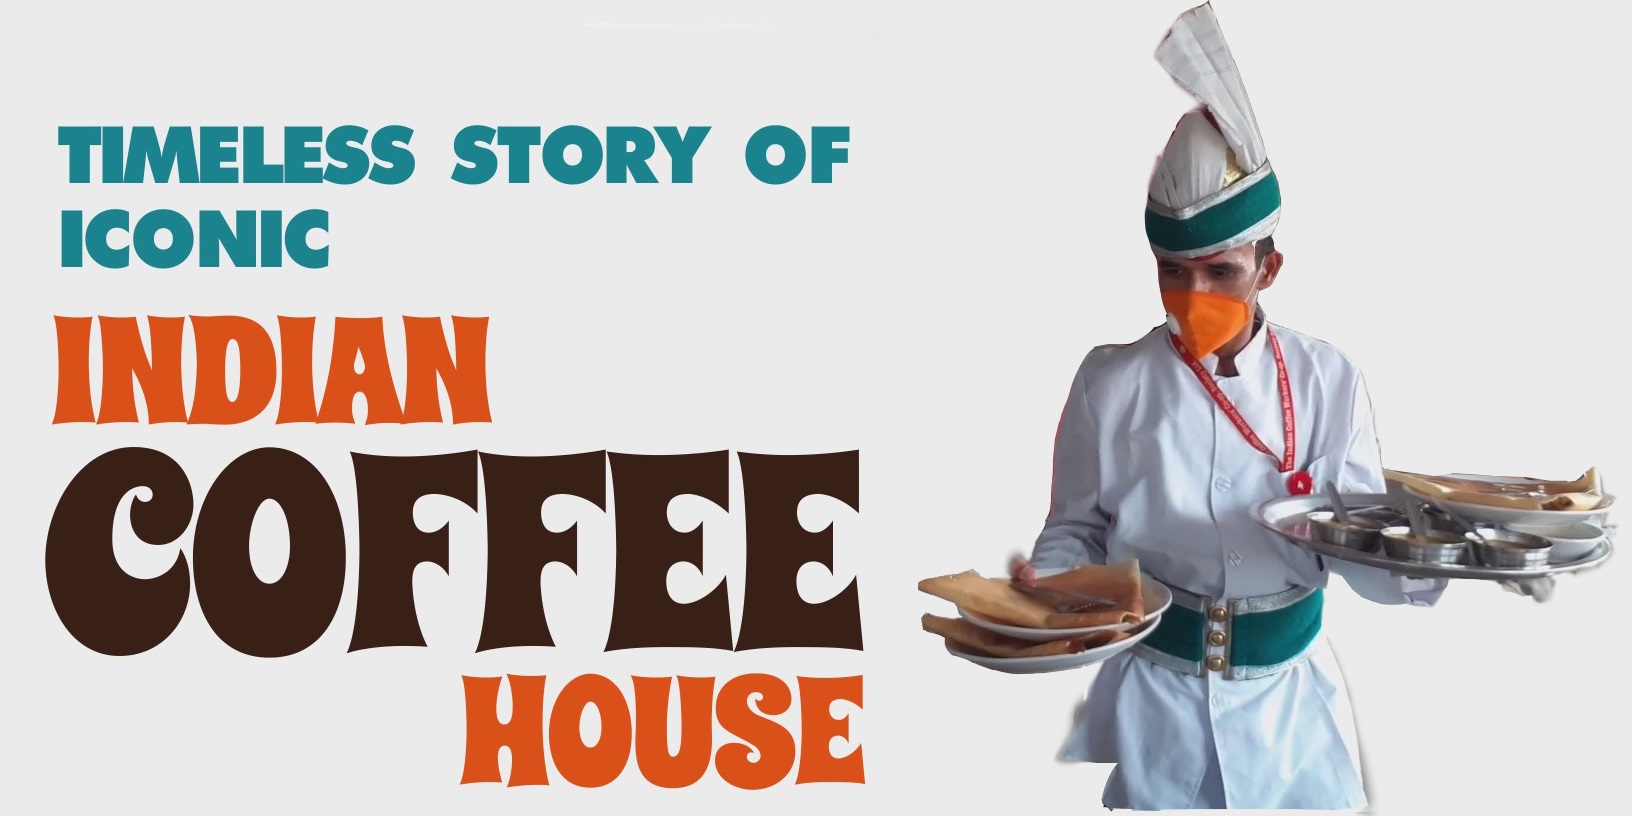 STORY OF THE INDIAN COFFEE HOUSE: TIMELESS AND ICONIC